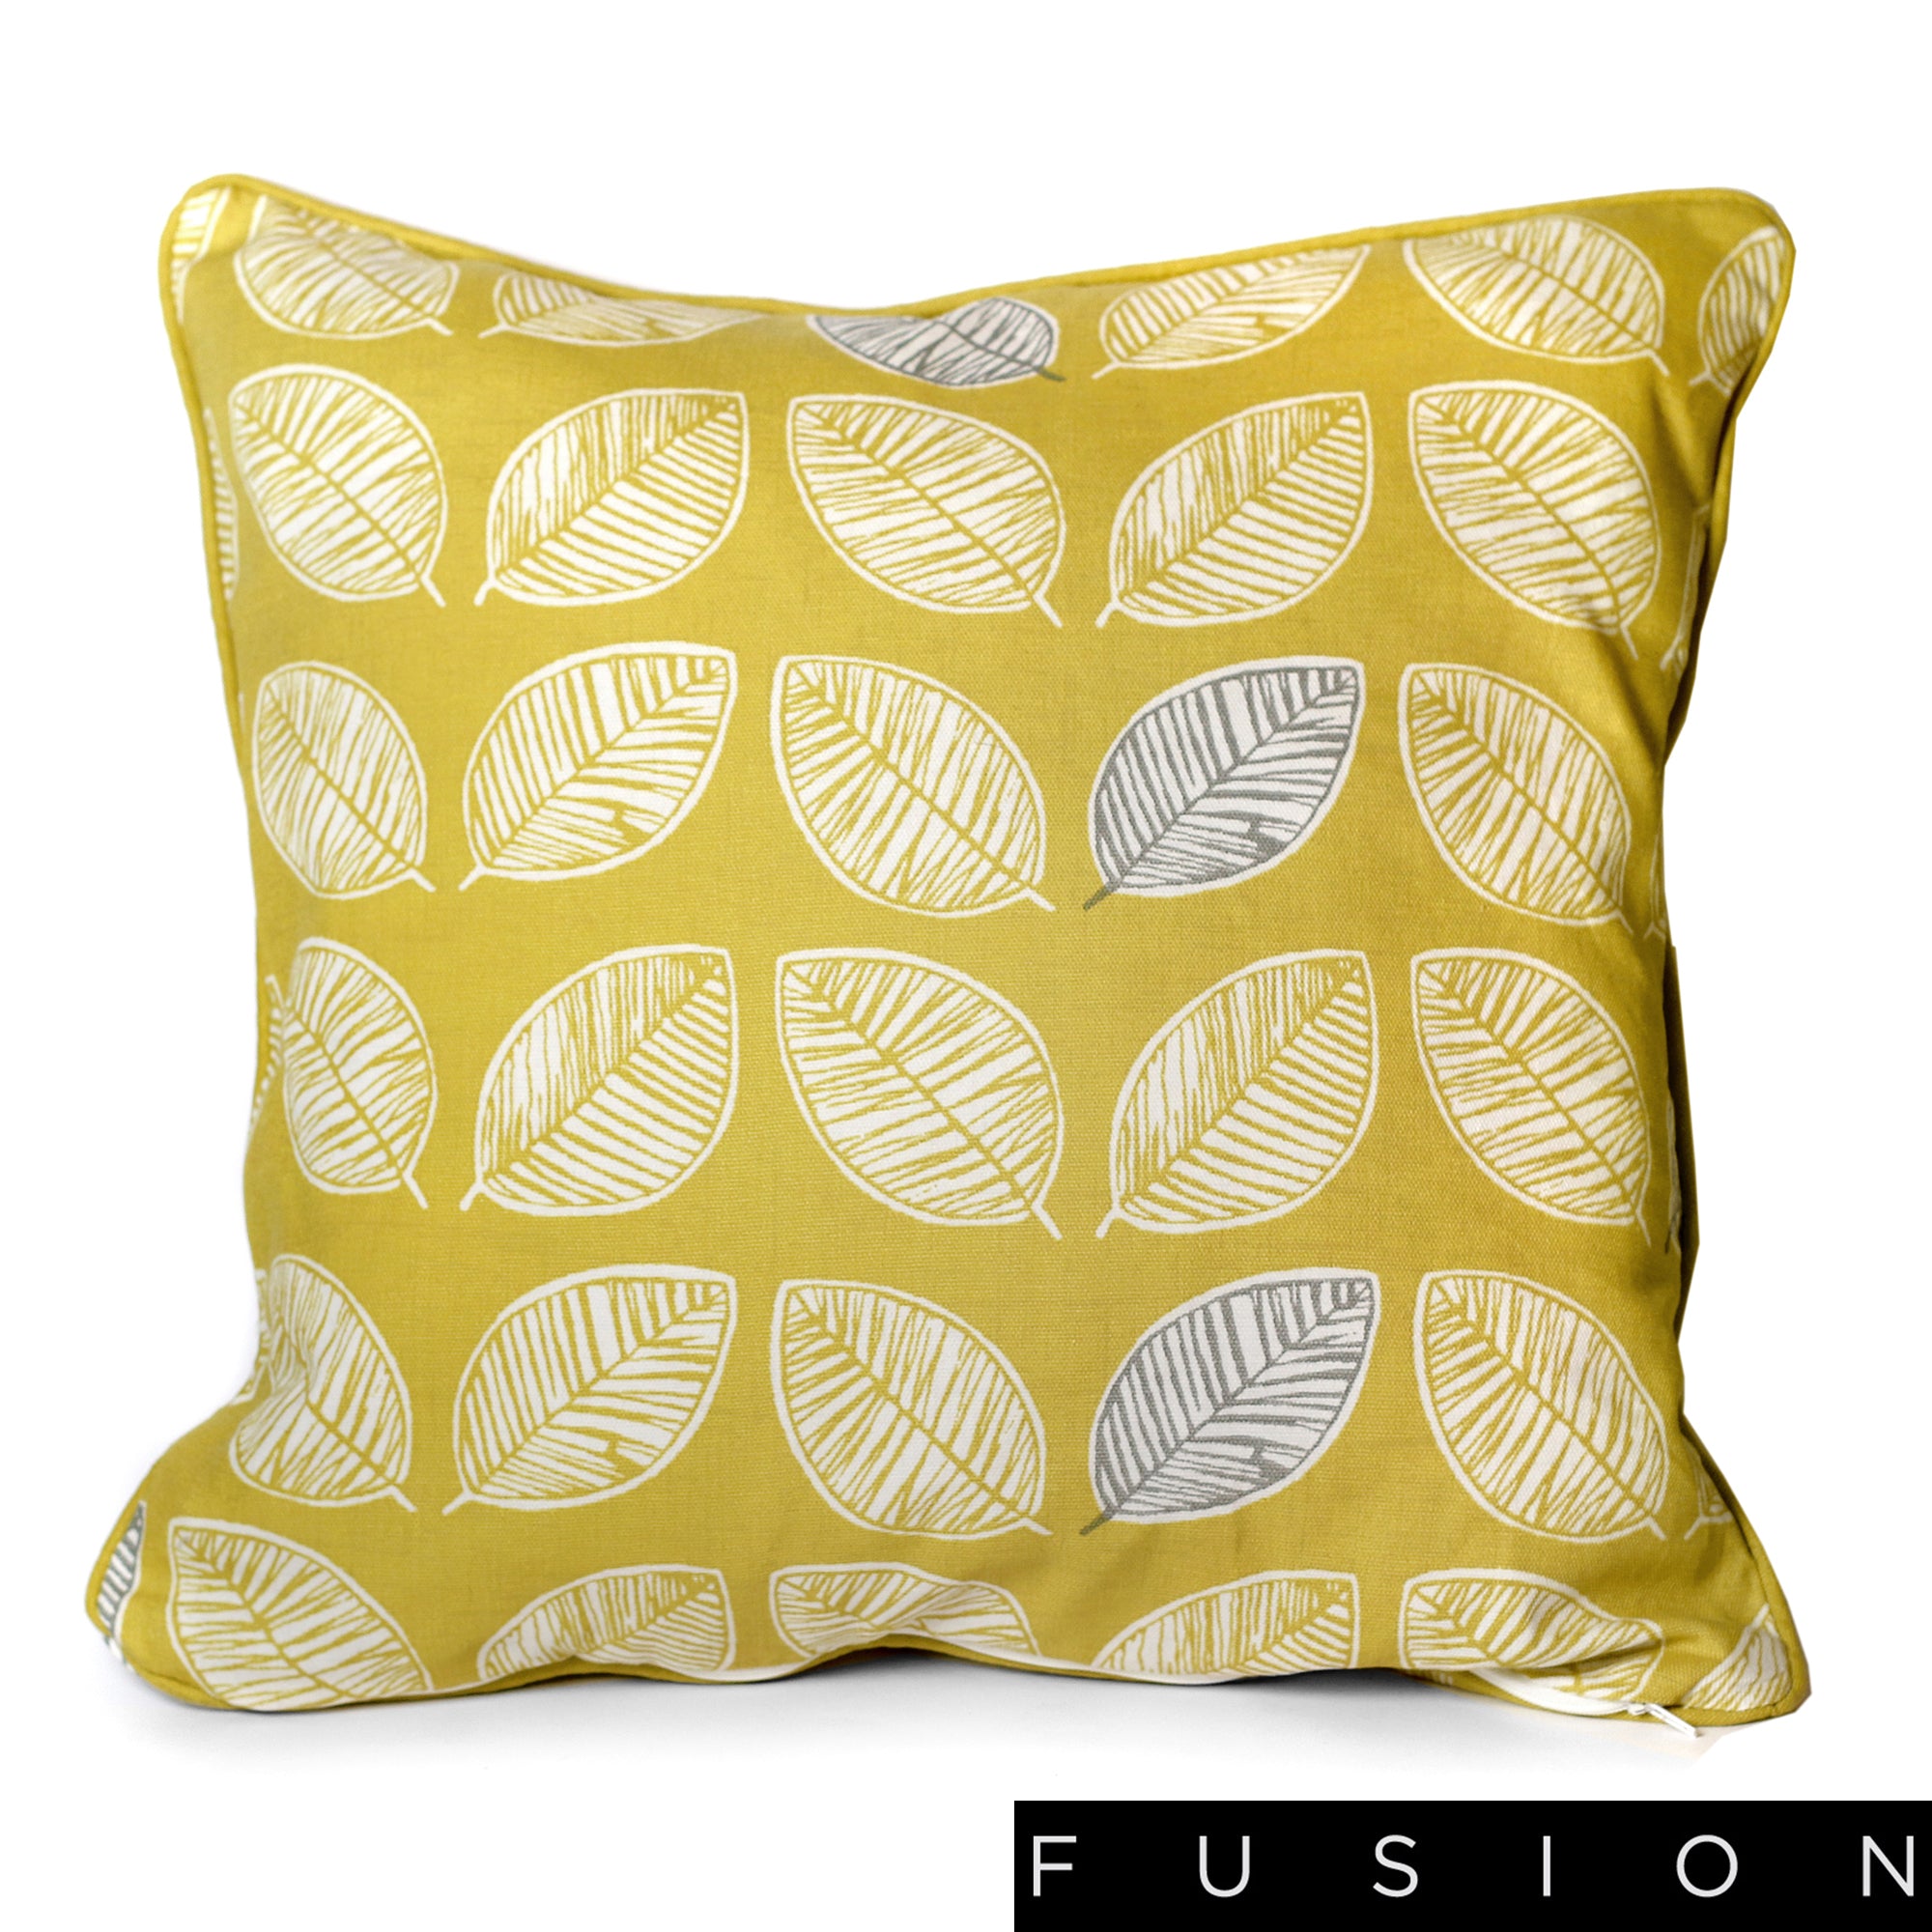 Delft - Filled Square Cushion - by Fusion